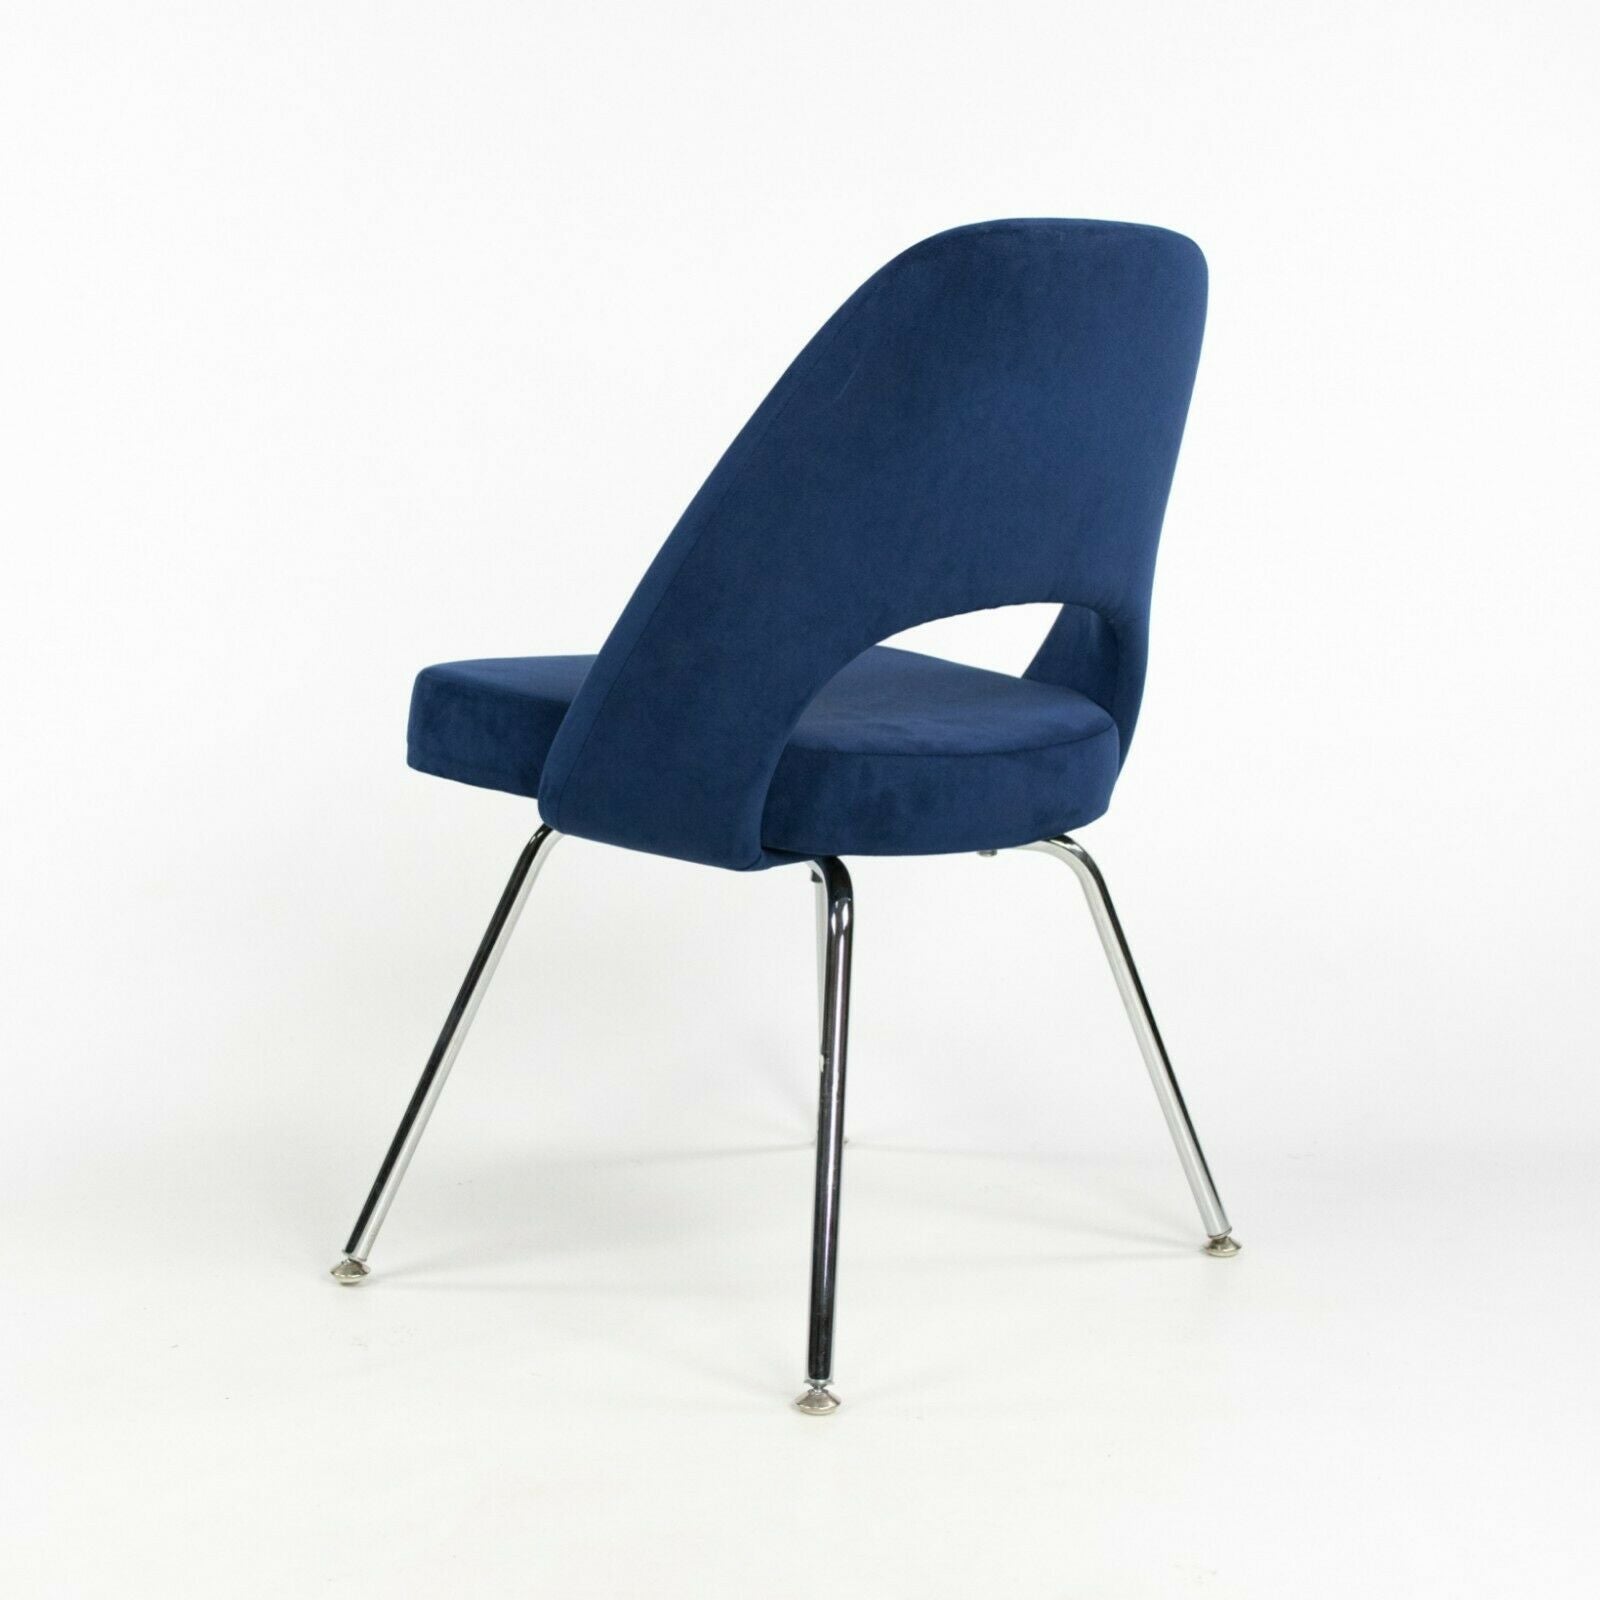 2015 Eero Saarinen for Knoll Armless Executive Blue Suede Side Chair 2x Available